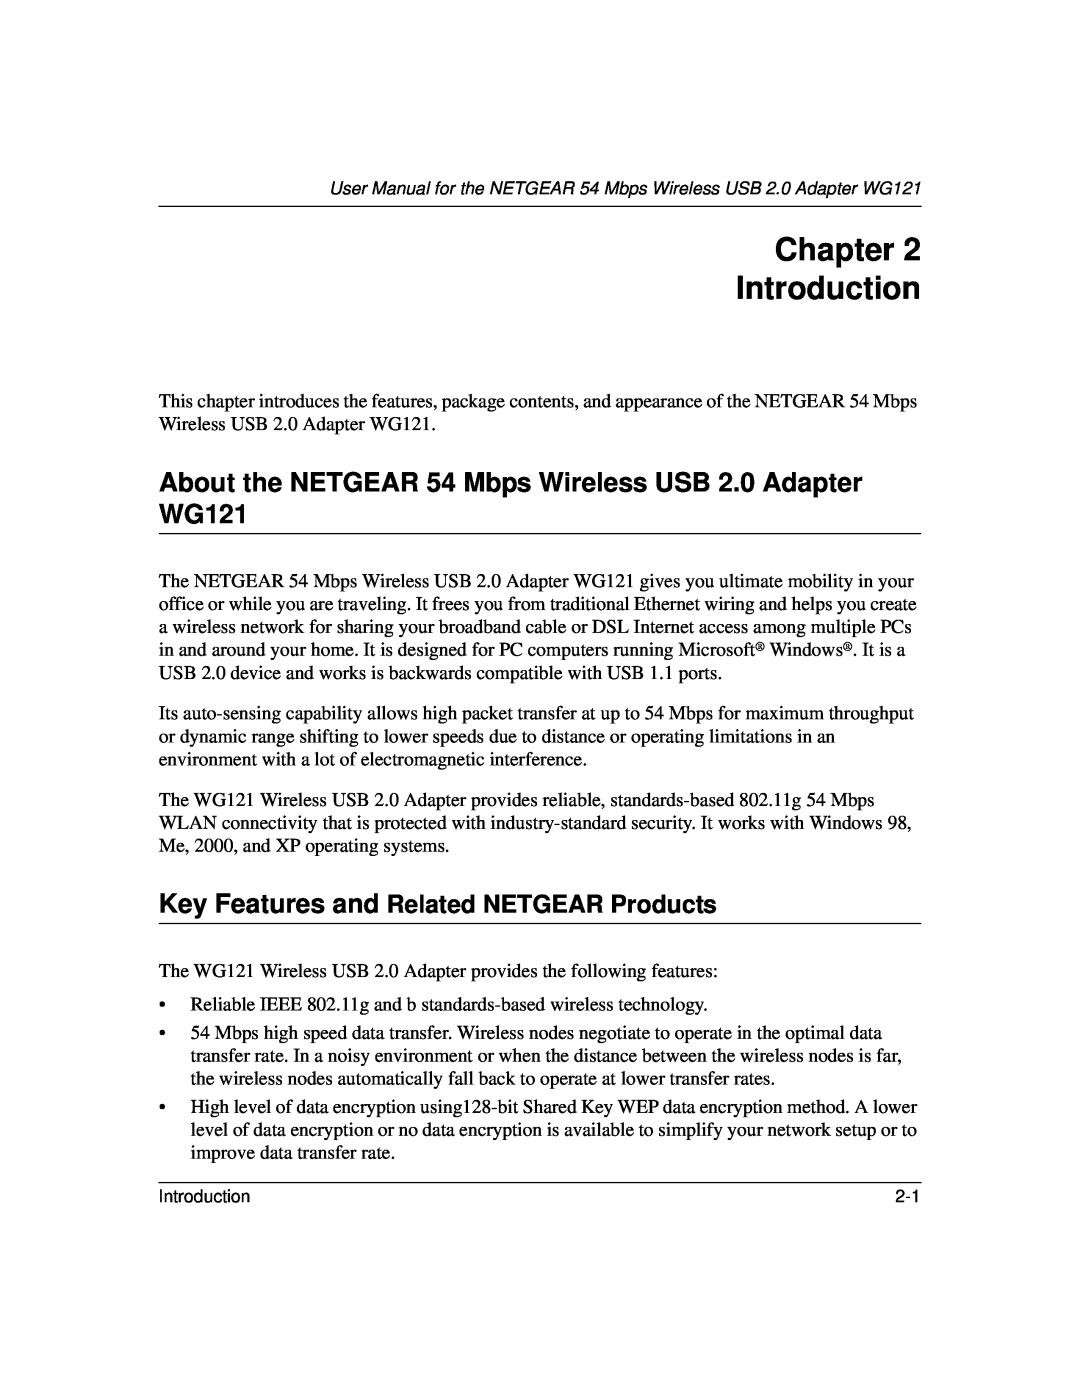 NETGEAR user manual Chapter Introduction, About the NETGEAR 54 Mbps Wireless USB 2.0 Adapter WG121 